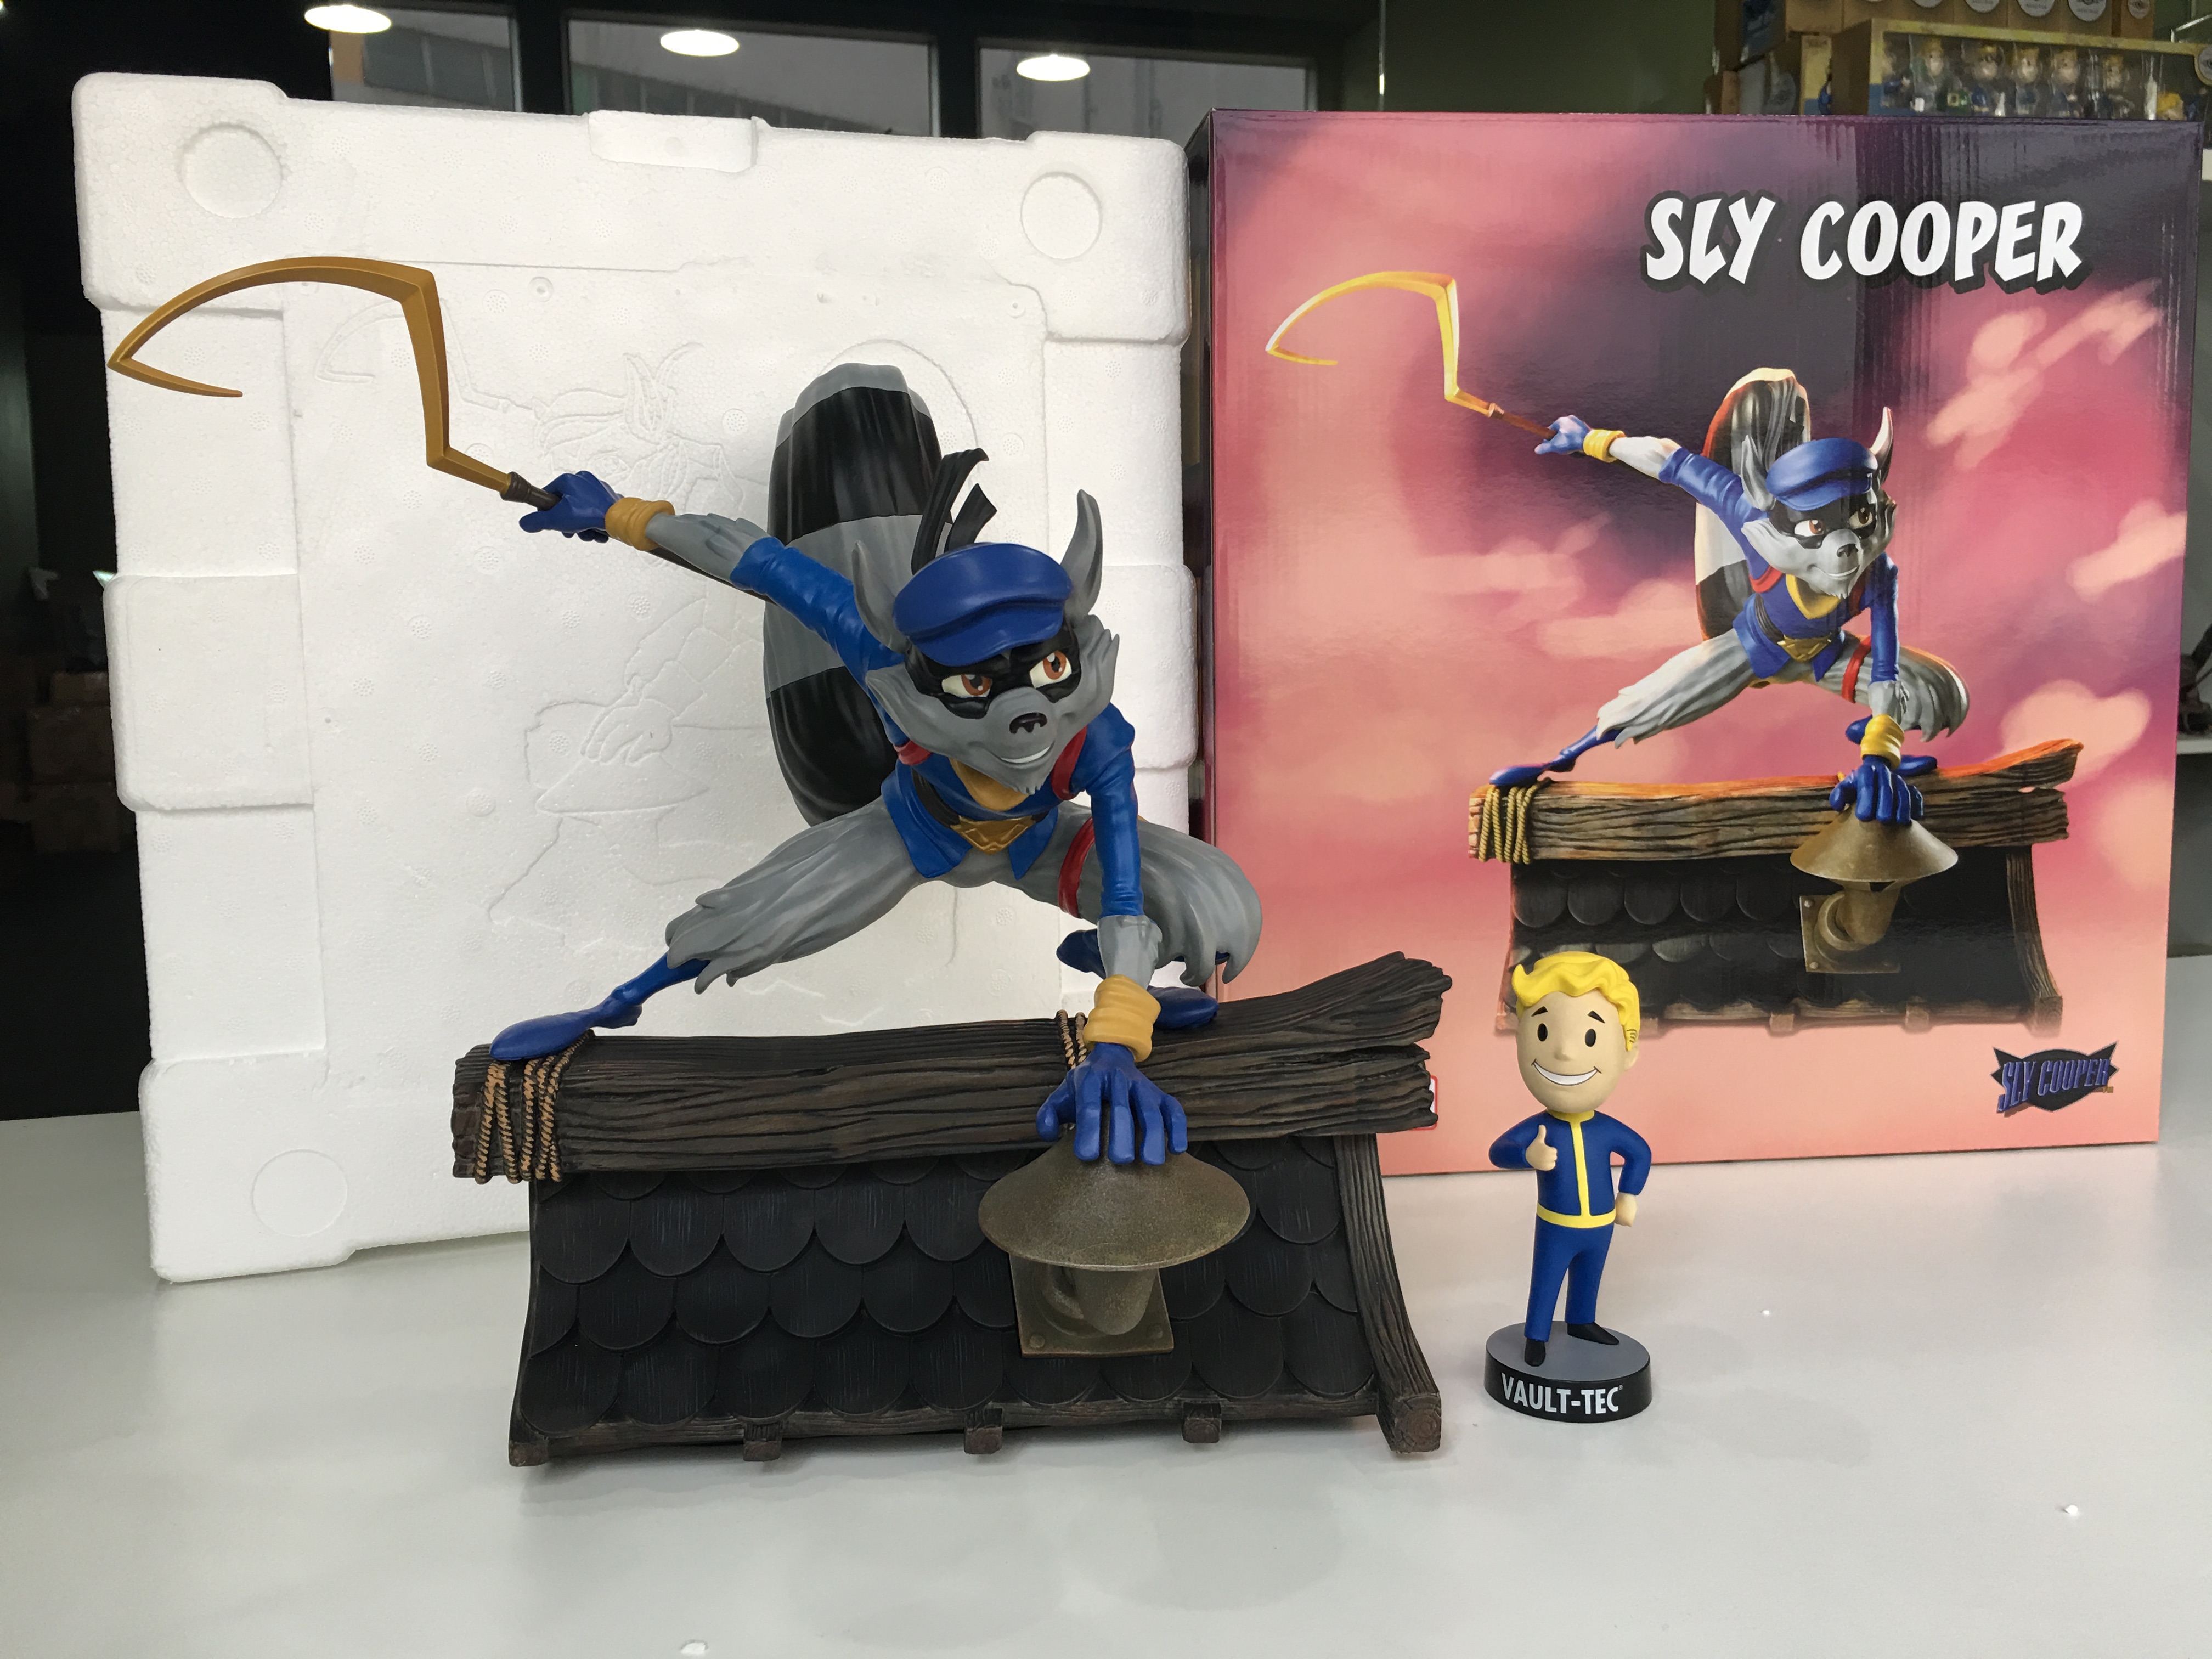 Sly Cooper statue